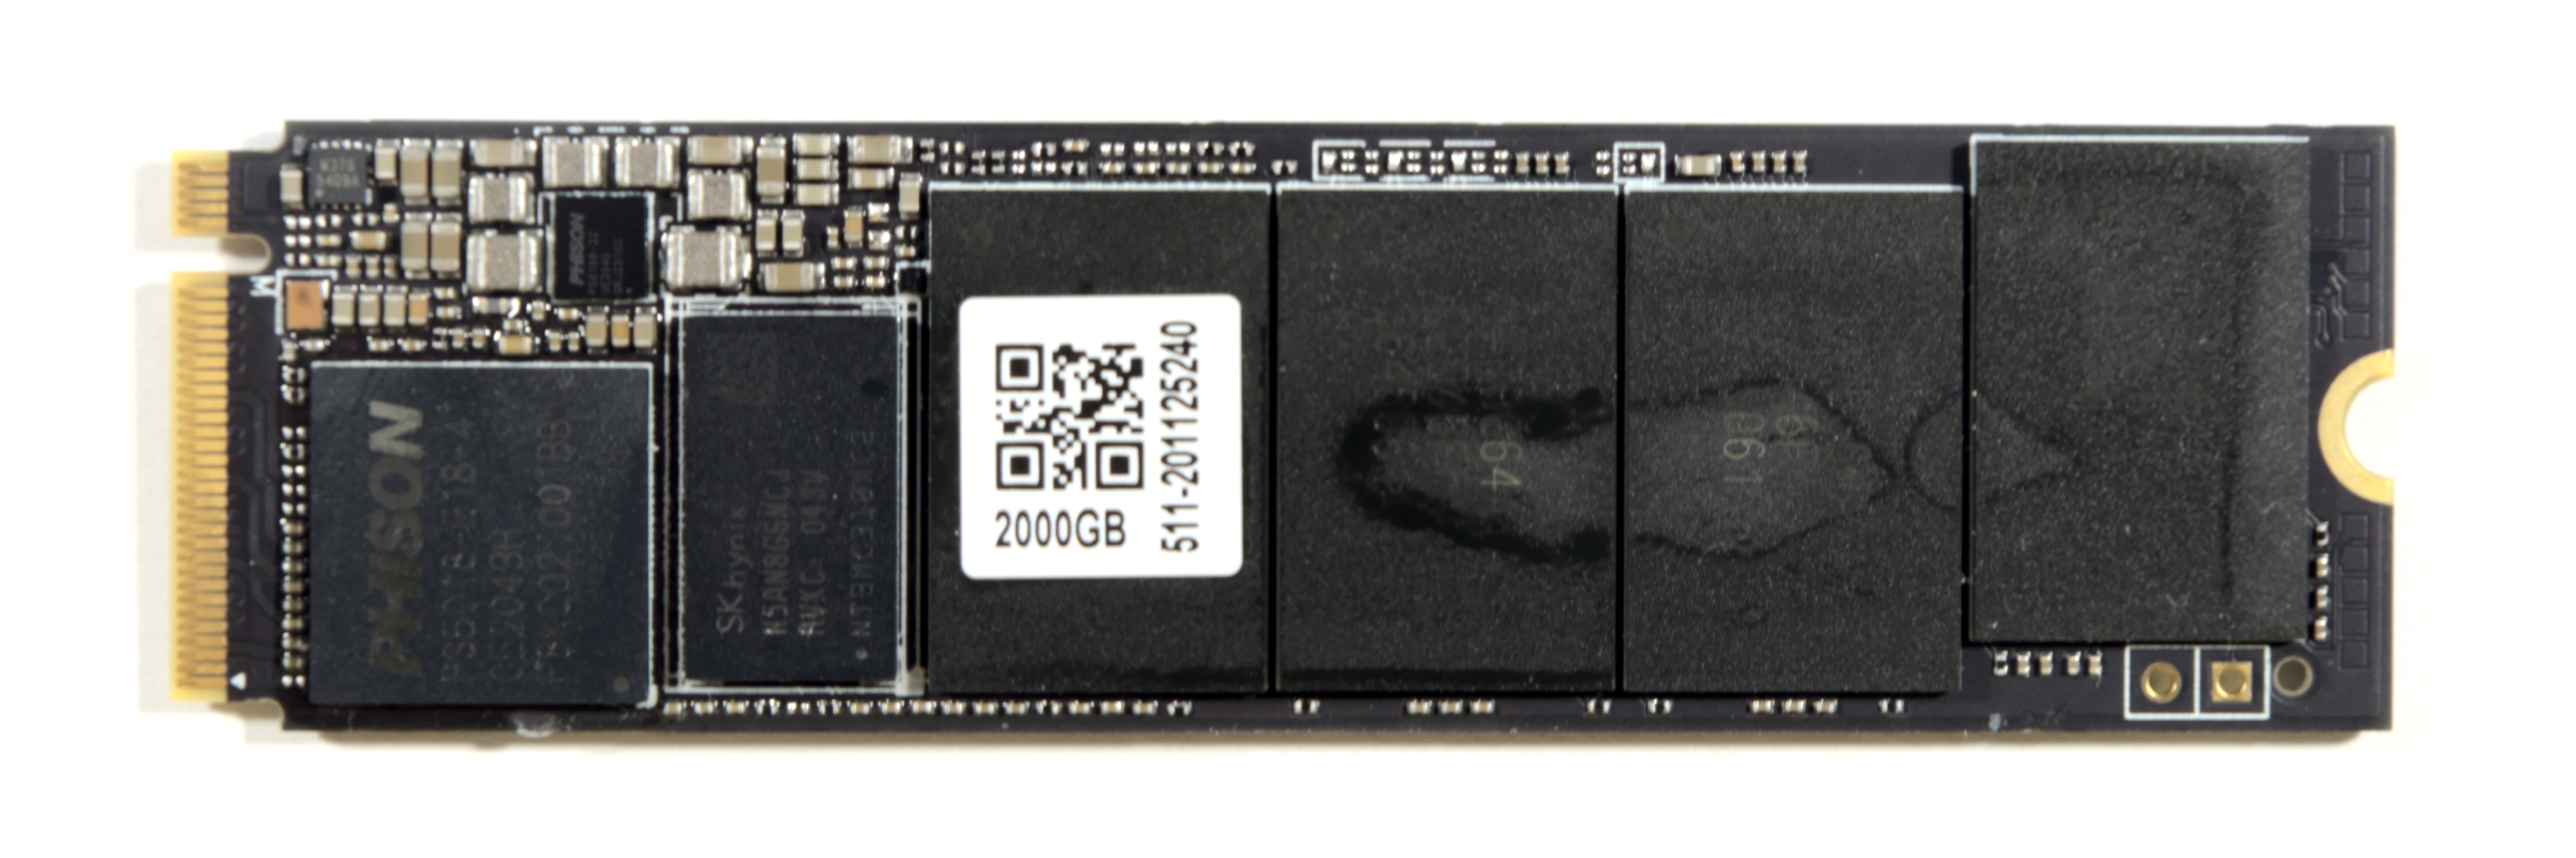 The Inland Performance Plus 2TB SSD Review: Phison's E18 NVMe